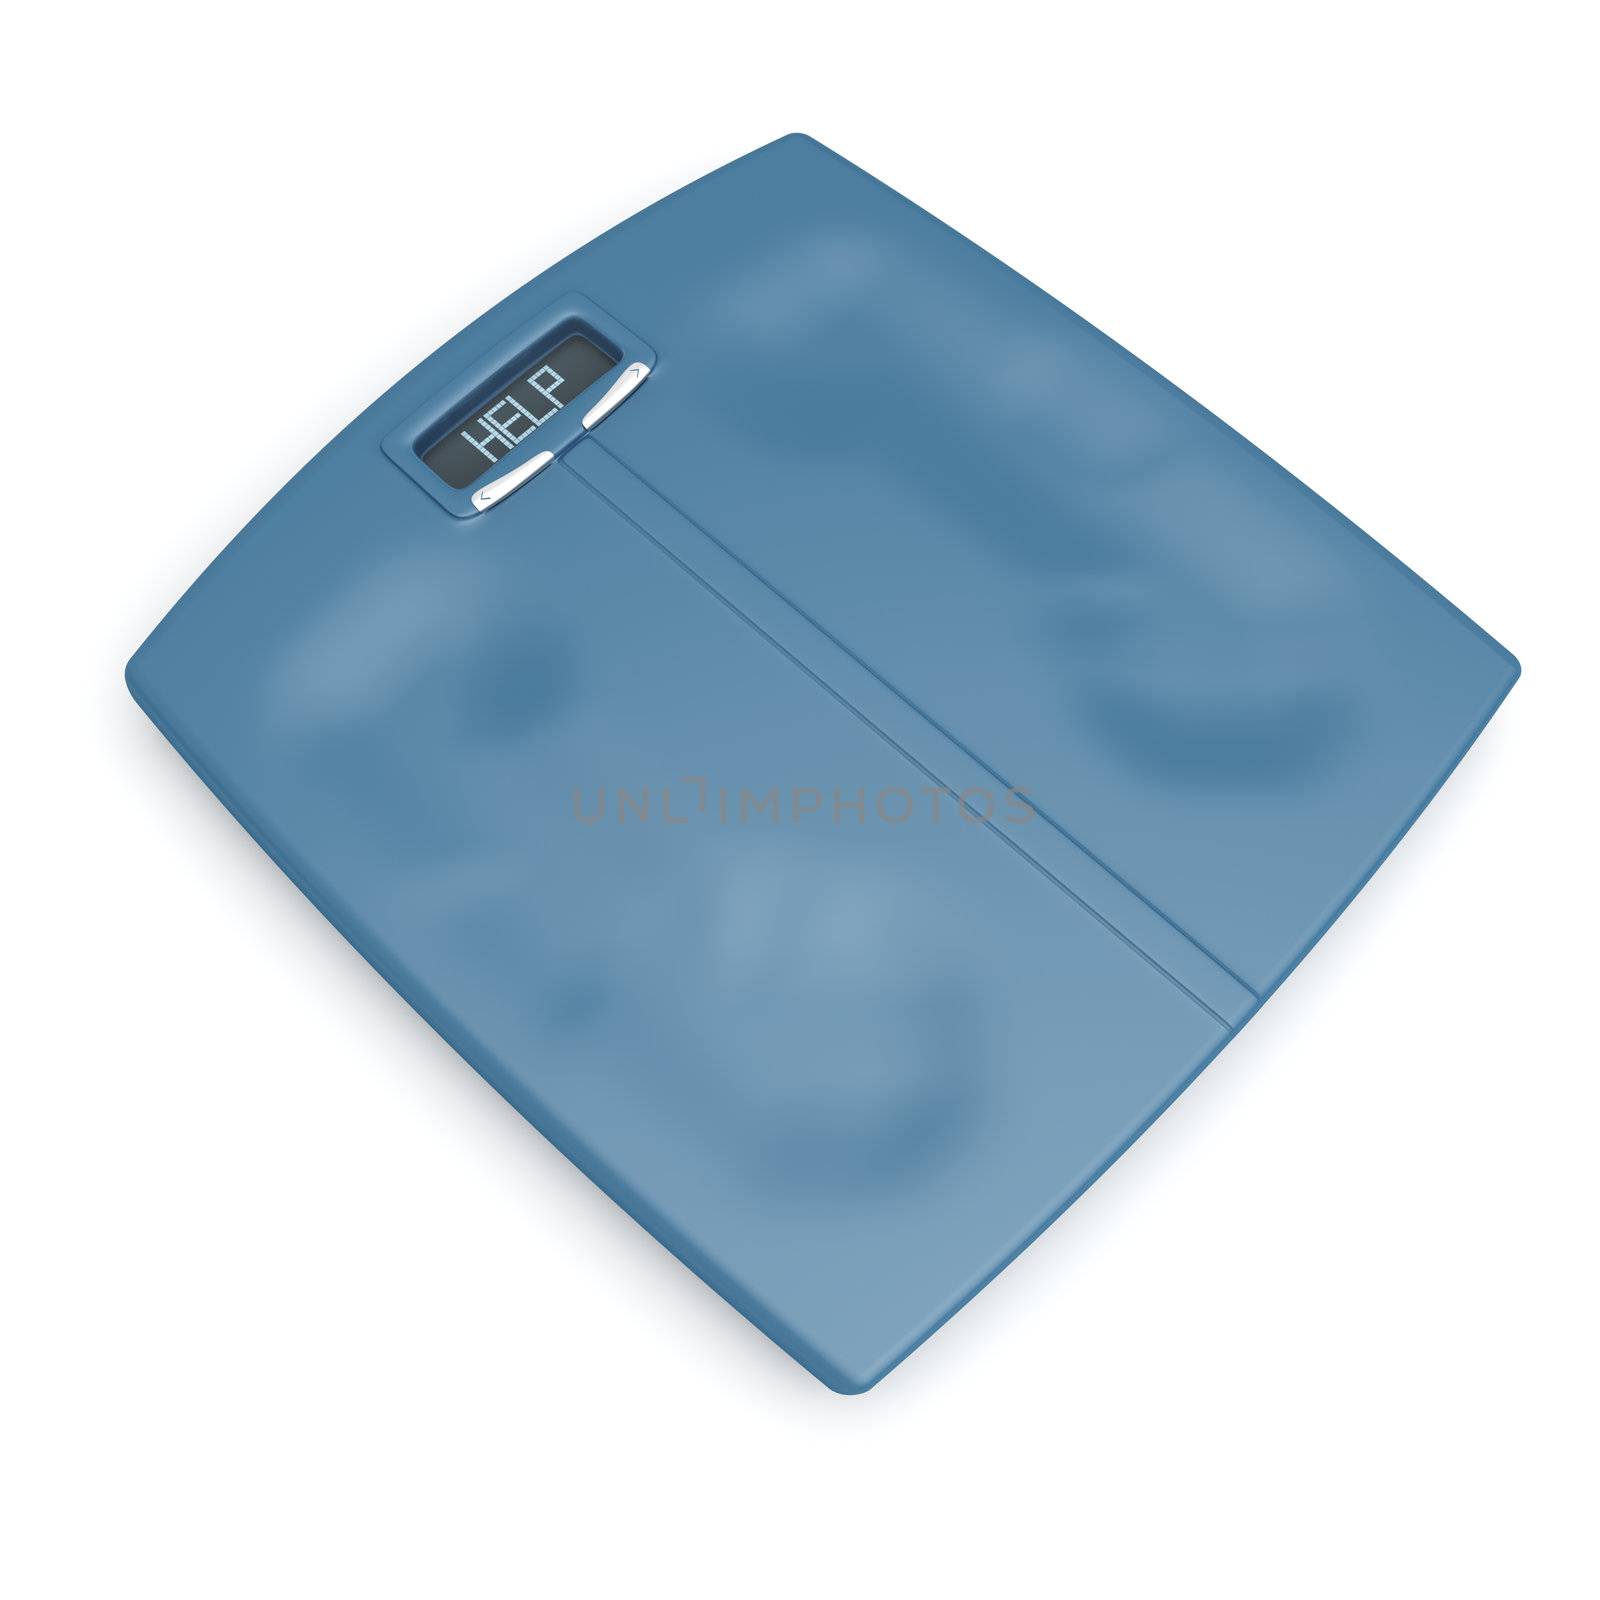 Bathroom weight scale with word HELP on display on white background